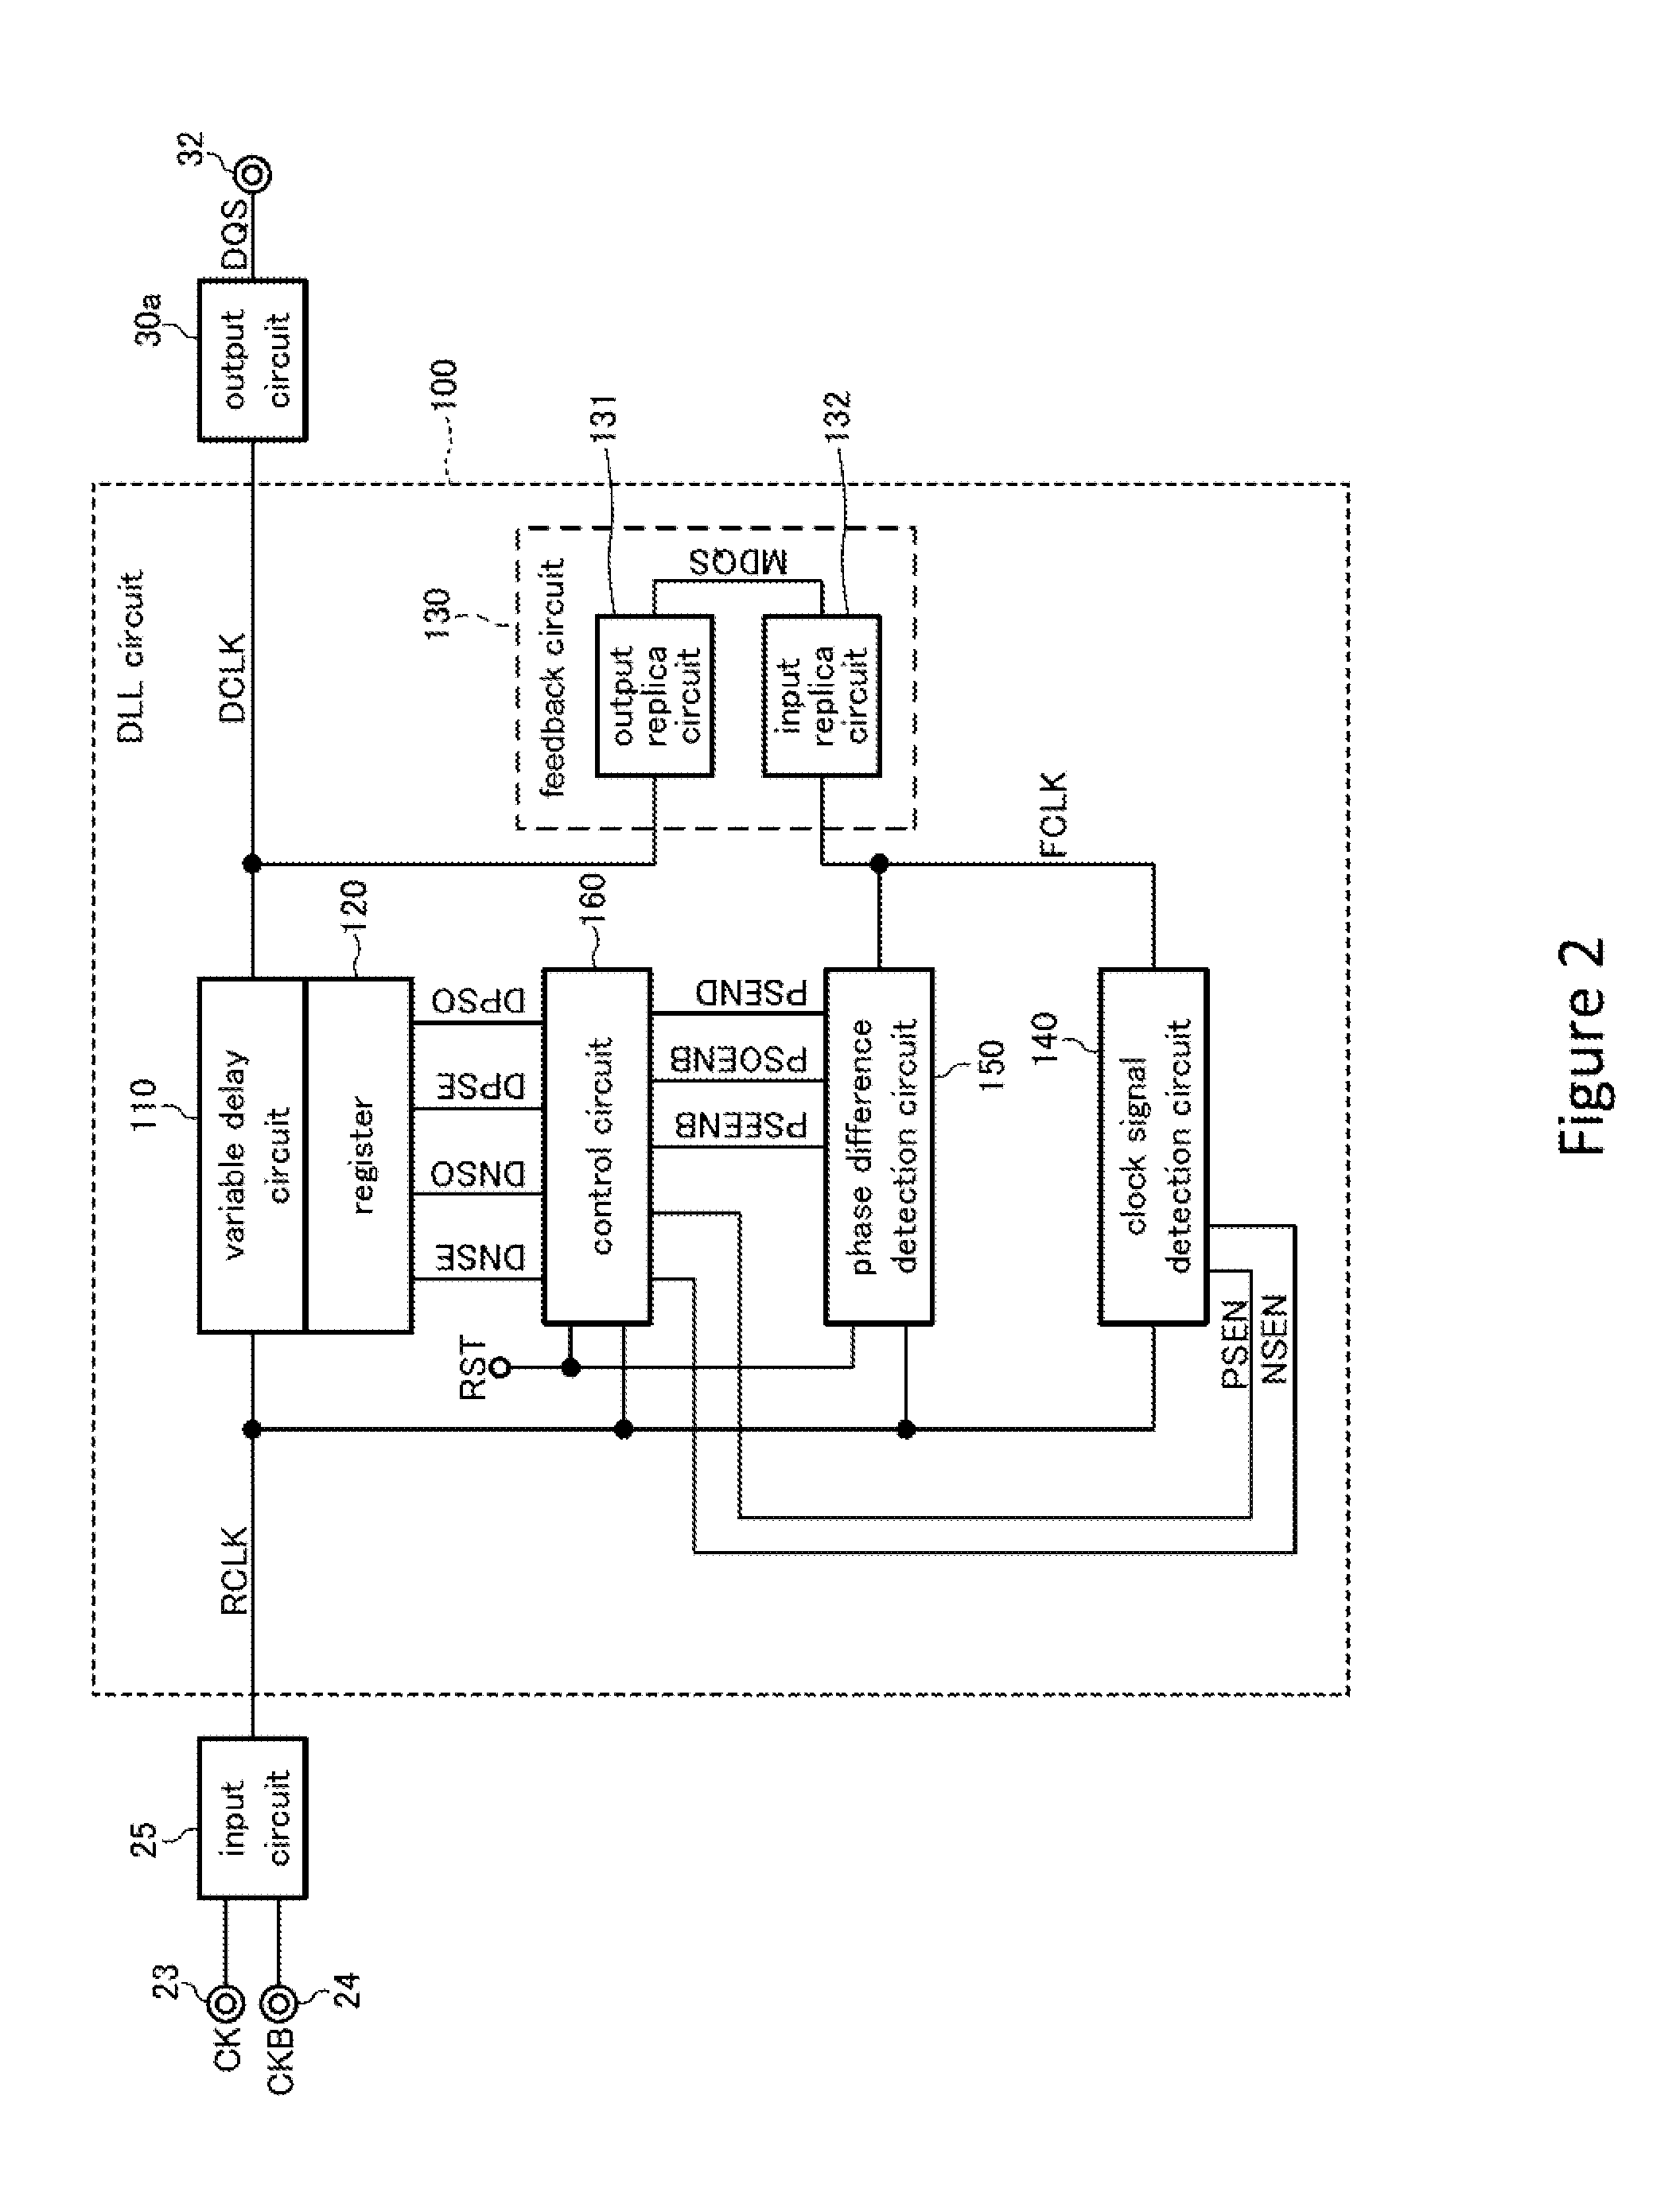 Semiconductor device including a clock adjustment circuit